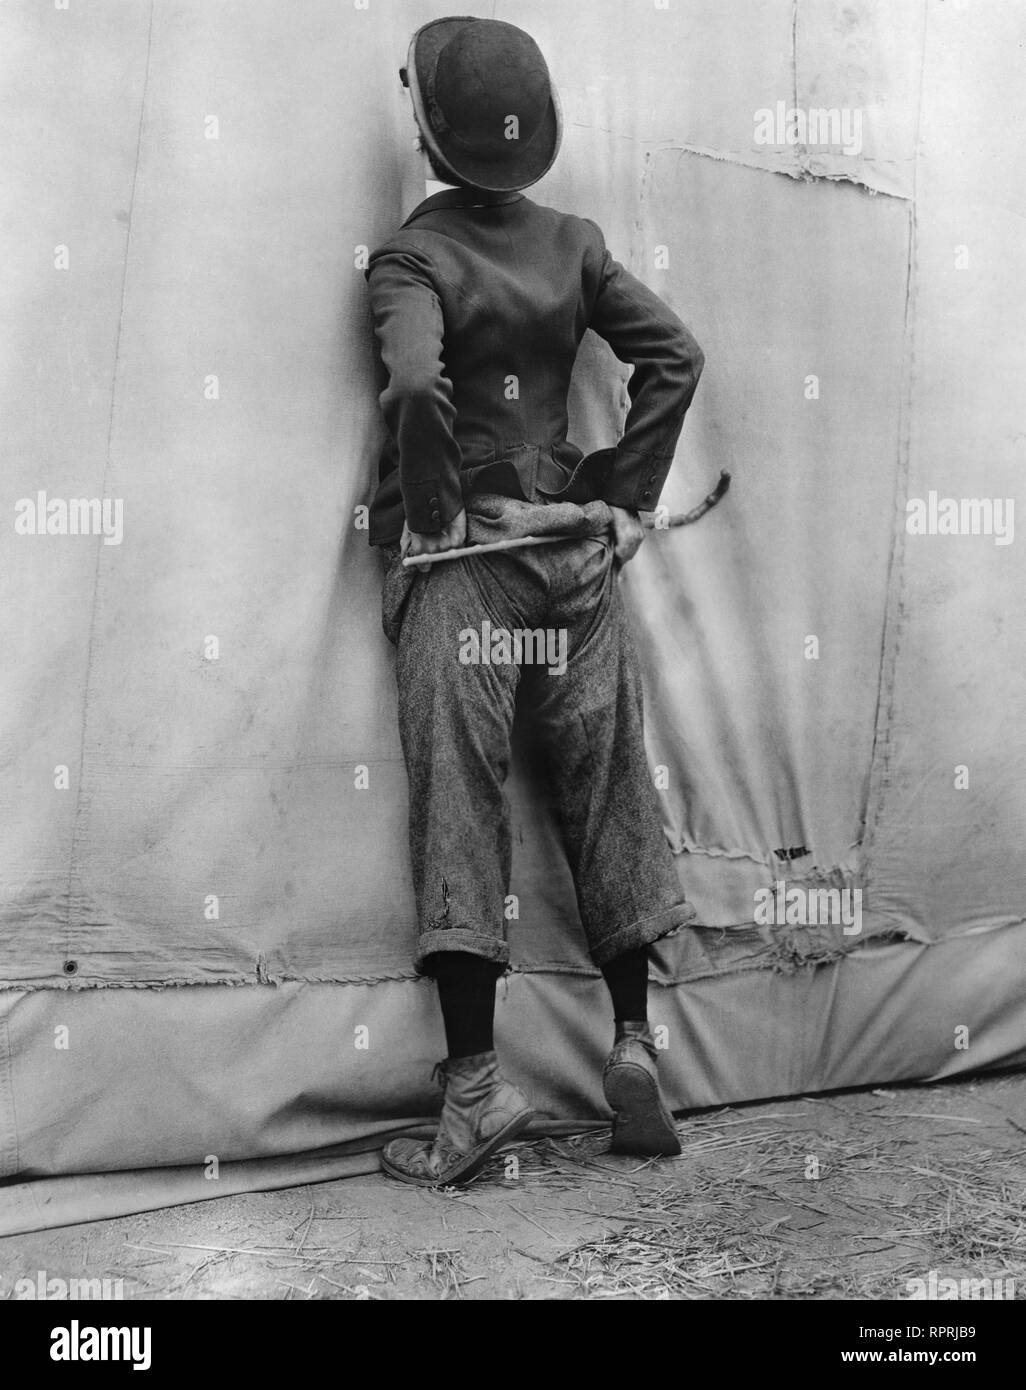 Charlie Chaplin The Circus 1928 classic pose  at circus tent Charles Chaplin Productions / United Artists Stock Photo